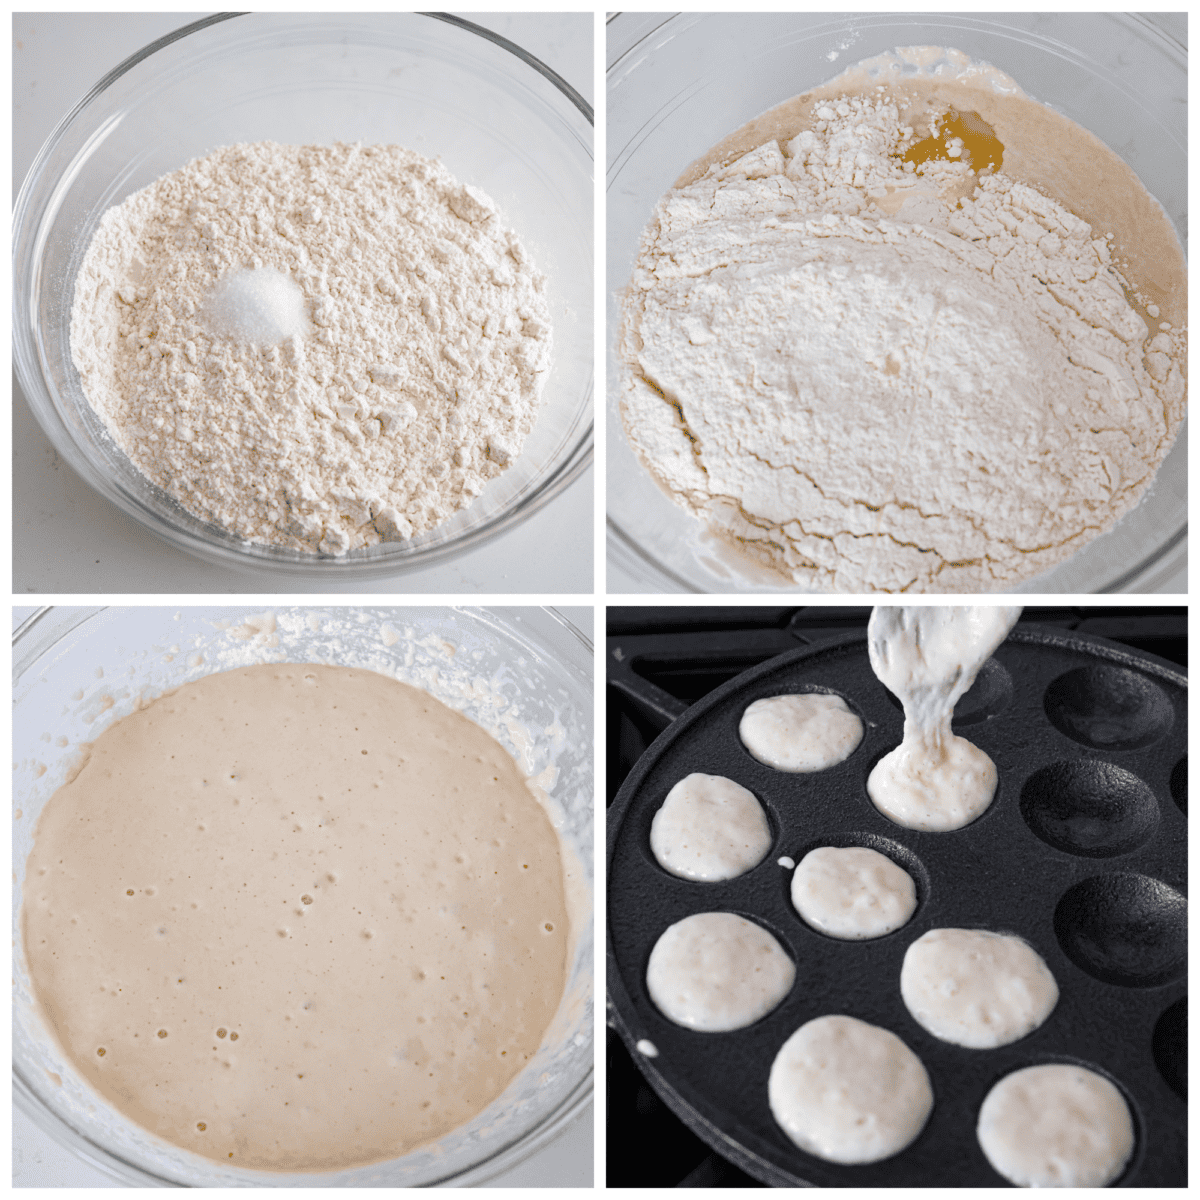 4-photo collage of the pancake dough being prepared and poured into a pan.